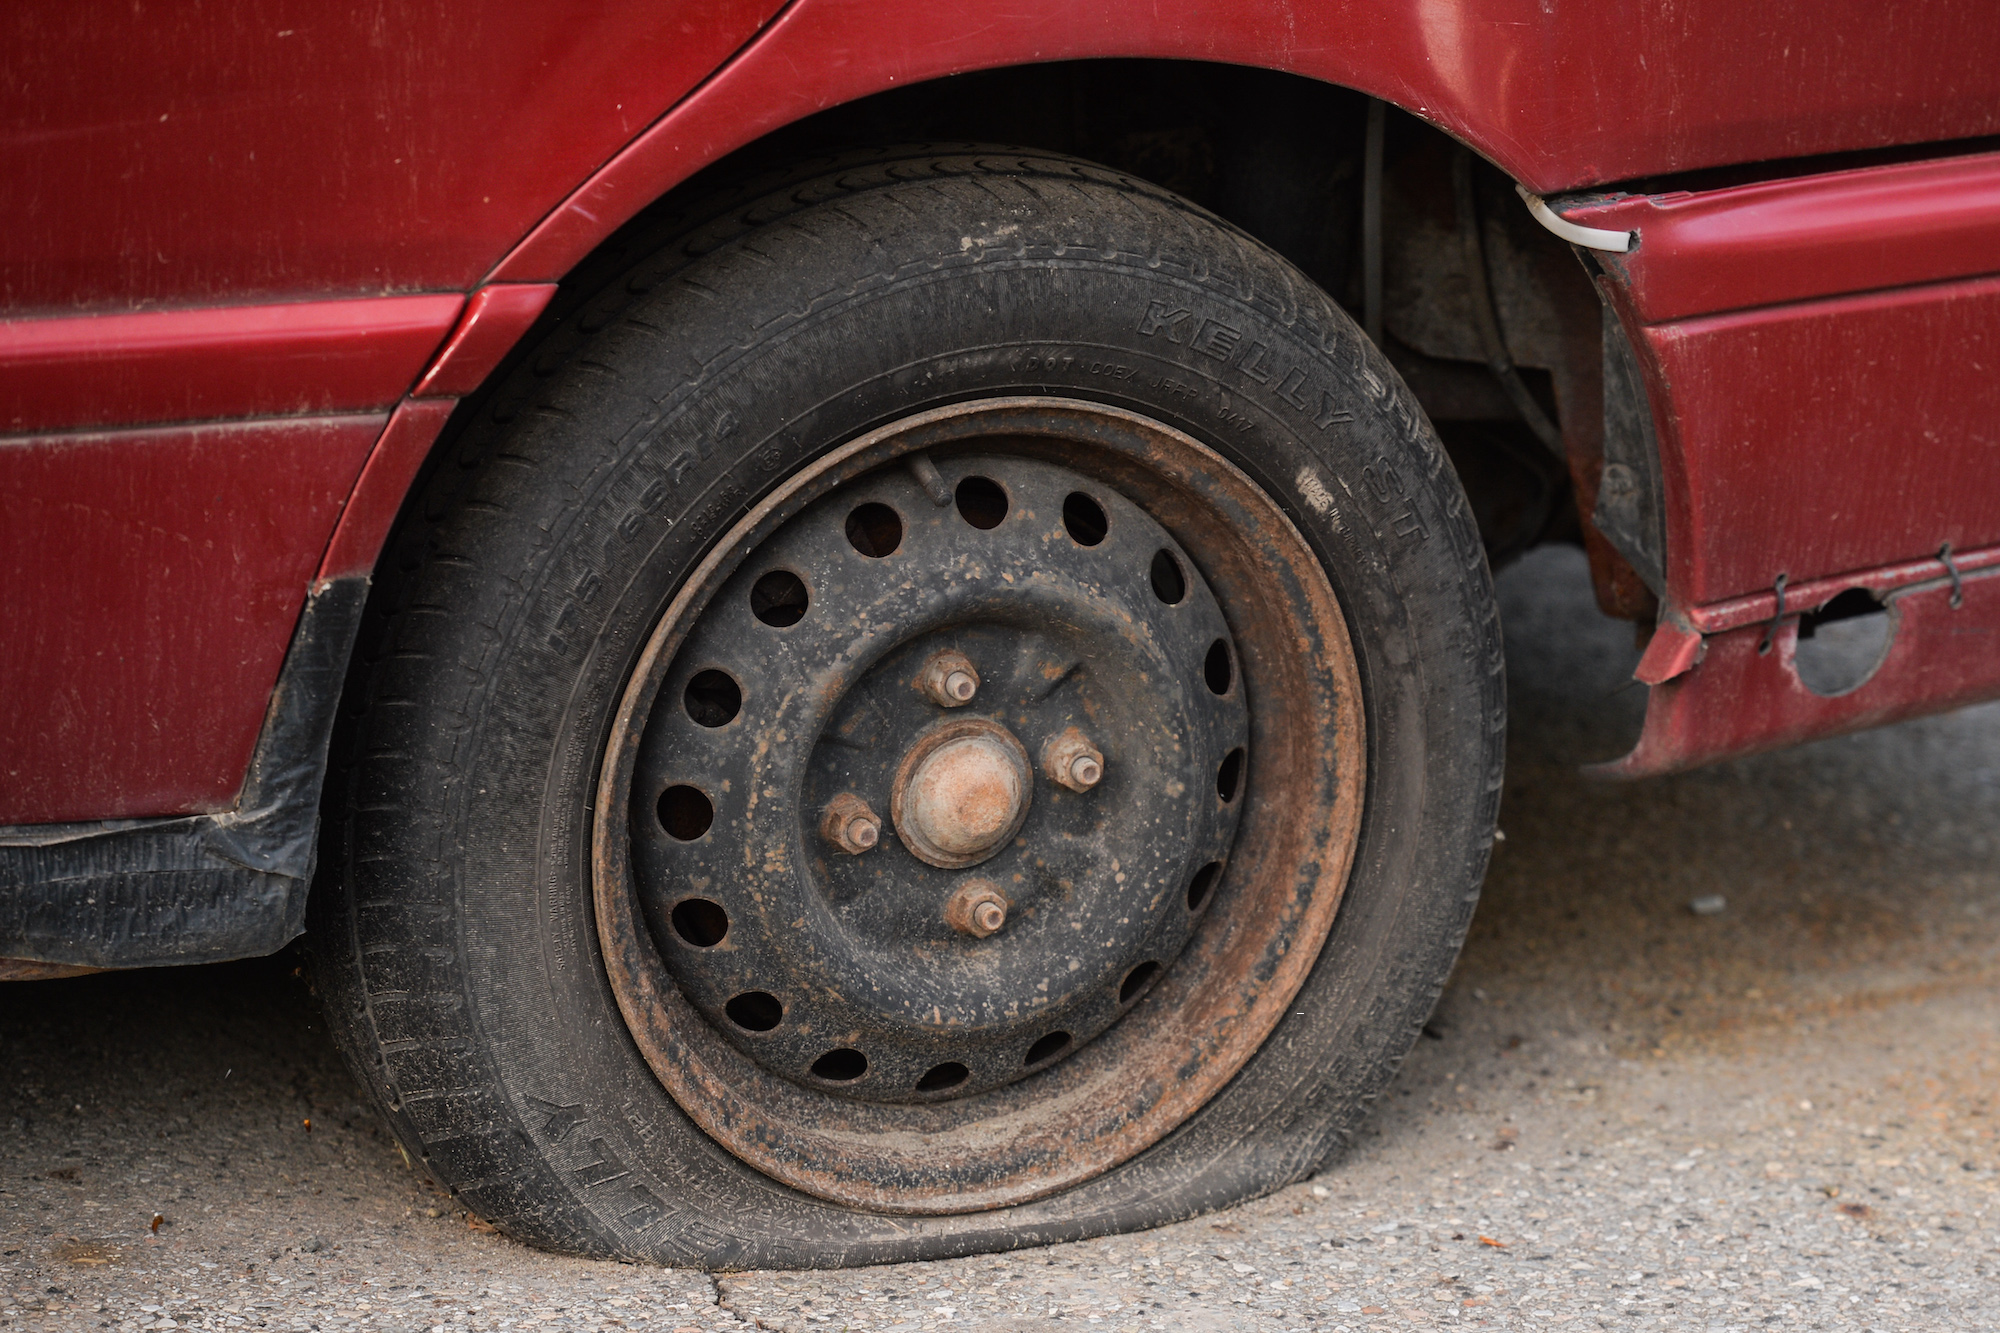 A flat tire on a red vehicle